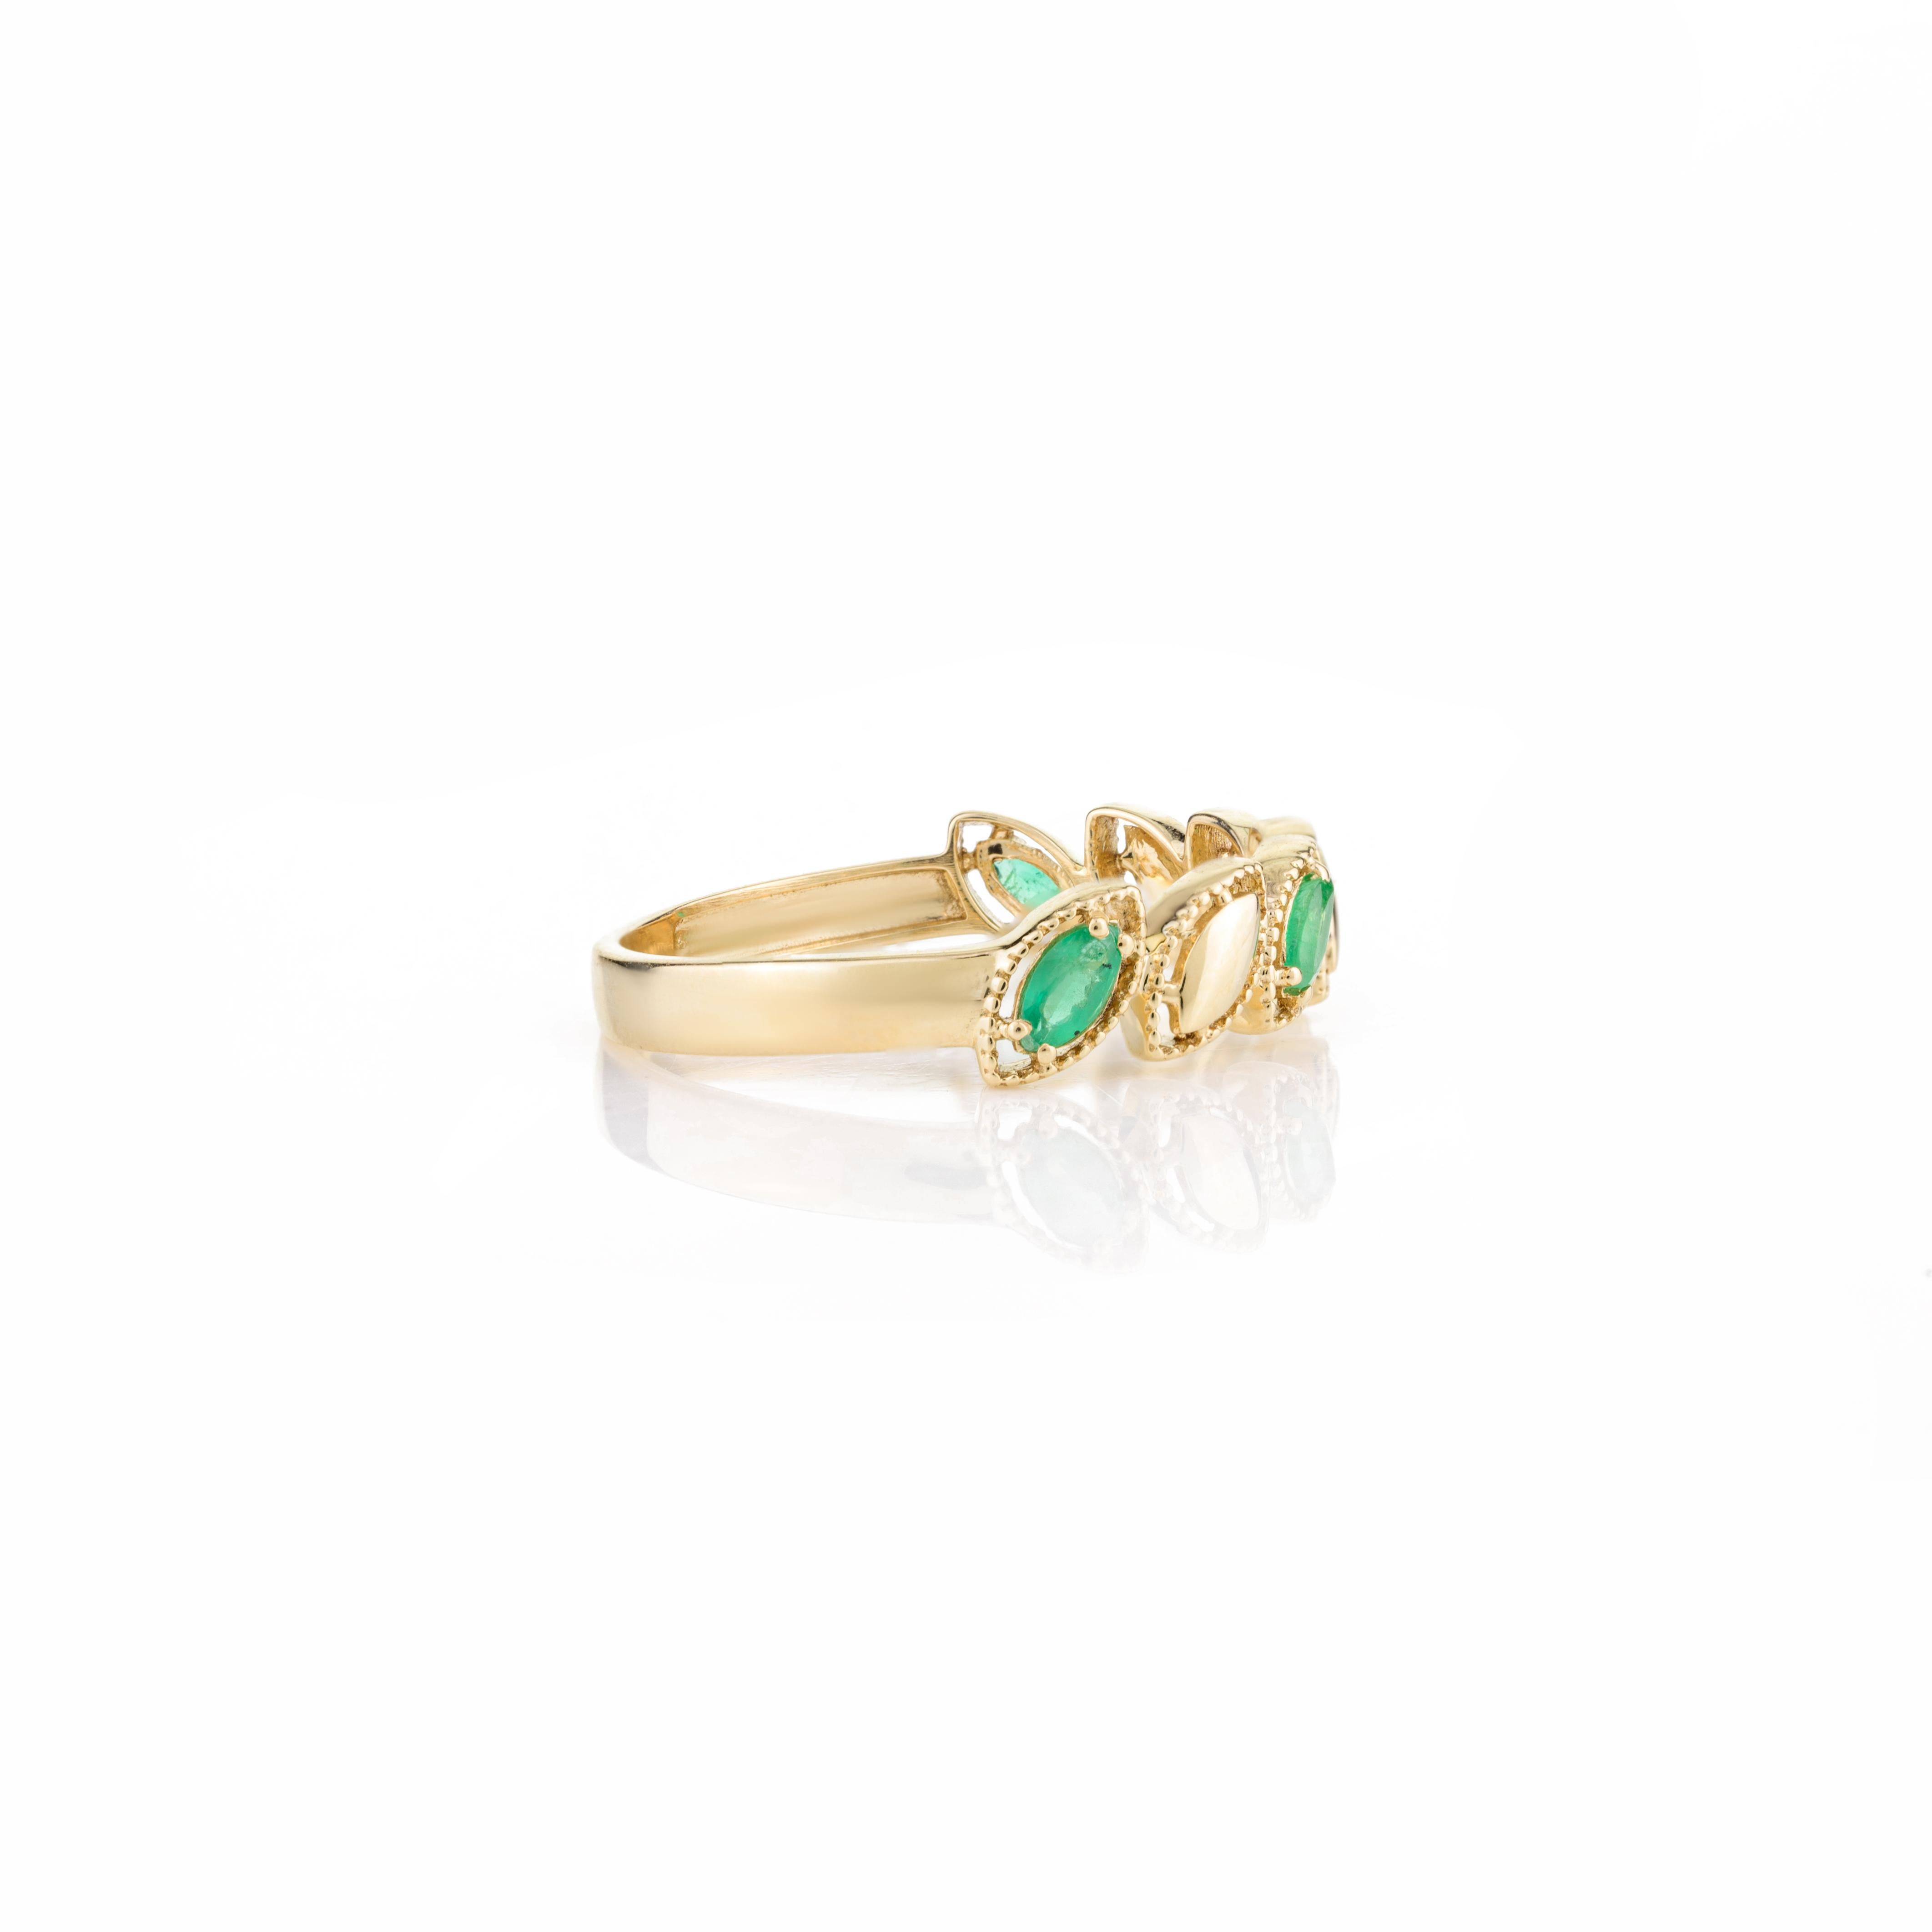 For Sale:  Delicate Emerald Birthstone Band Ring for Her in 14k Solid Yellow Gold 3